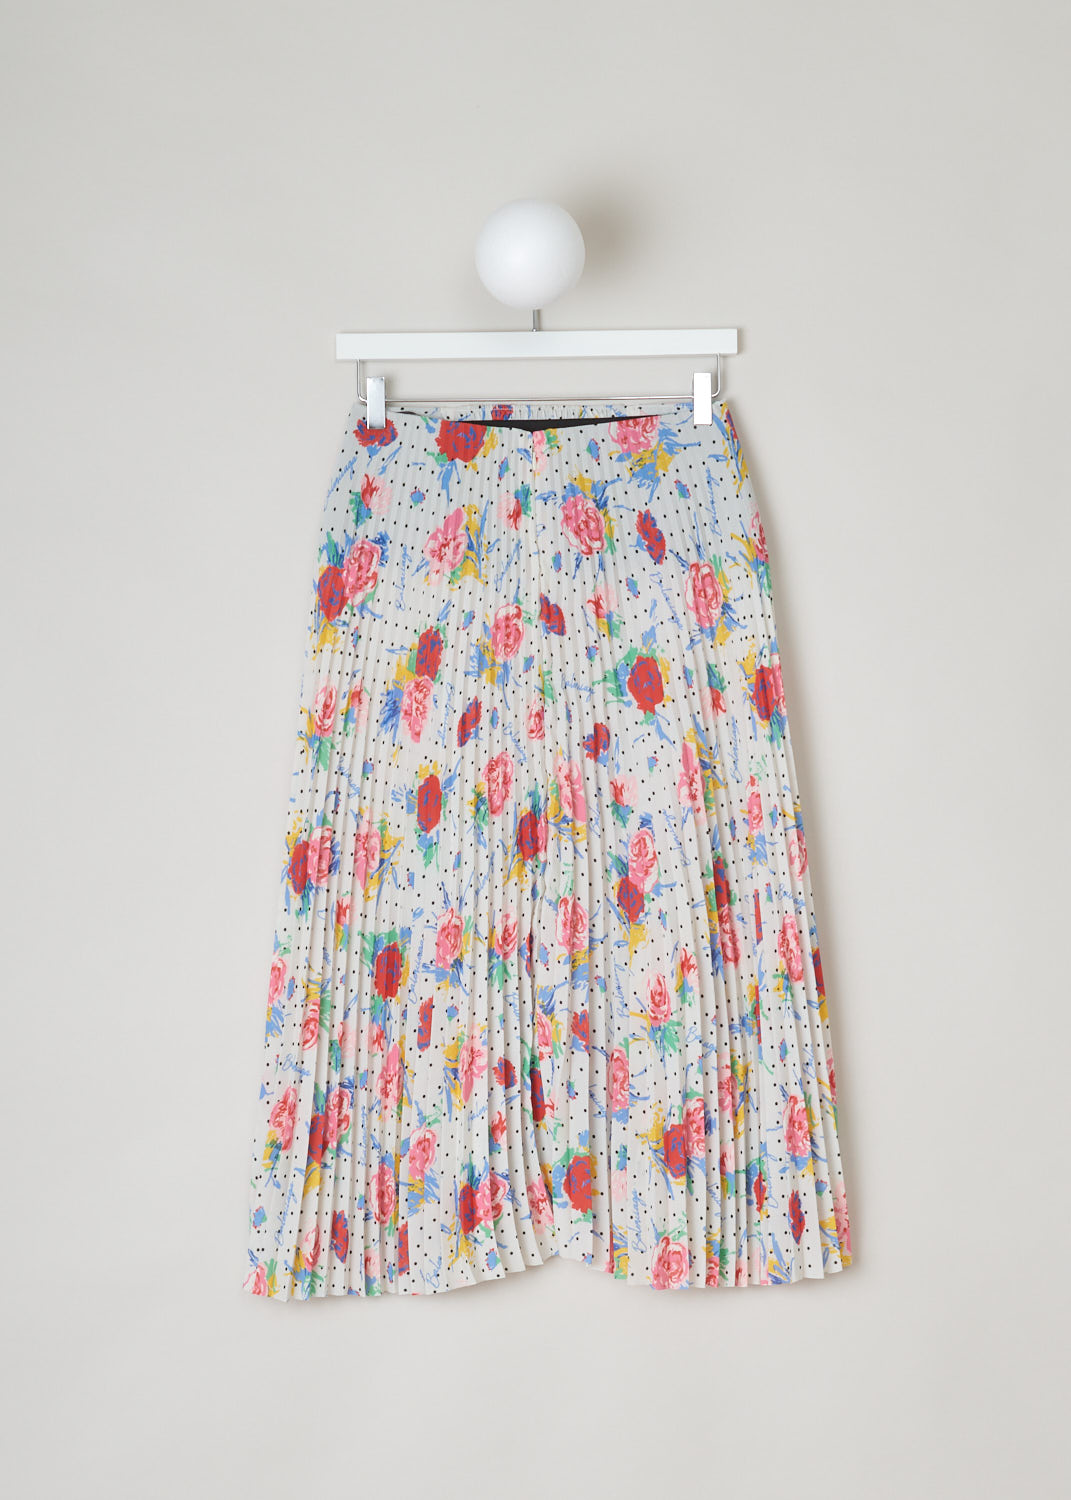 Balenciaga, Polka dot floral plissé skirt, 601169_THL07_9701, white red yellow green blue, back. This high-waisted multi-colored plissé skirt comes with a floral design pattern and polka dots through-out. The closure options on this piece are 2 metal hooks and beneath that a concealed zipper.